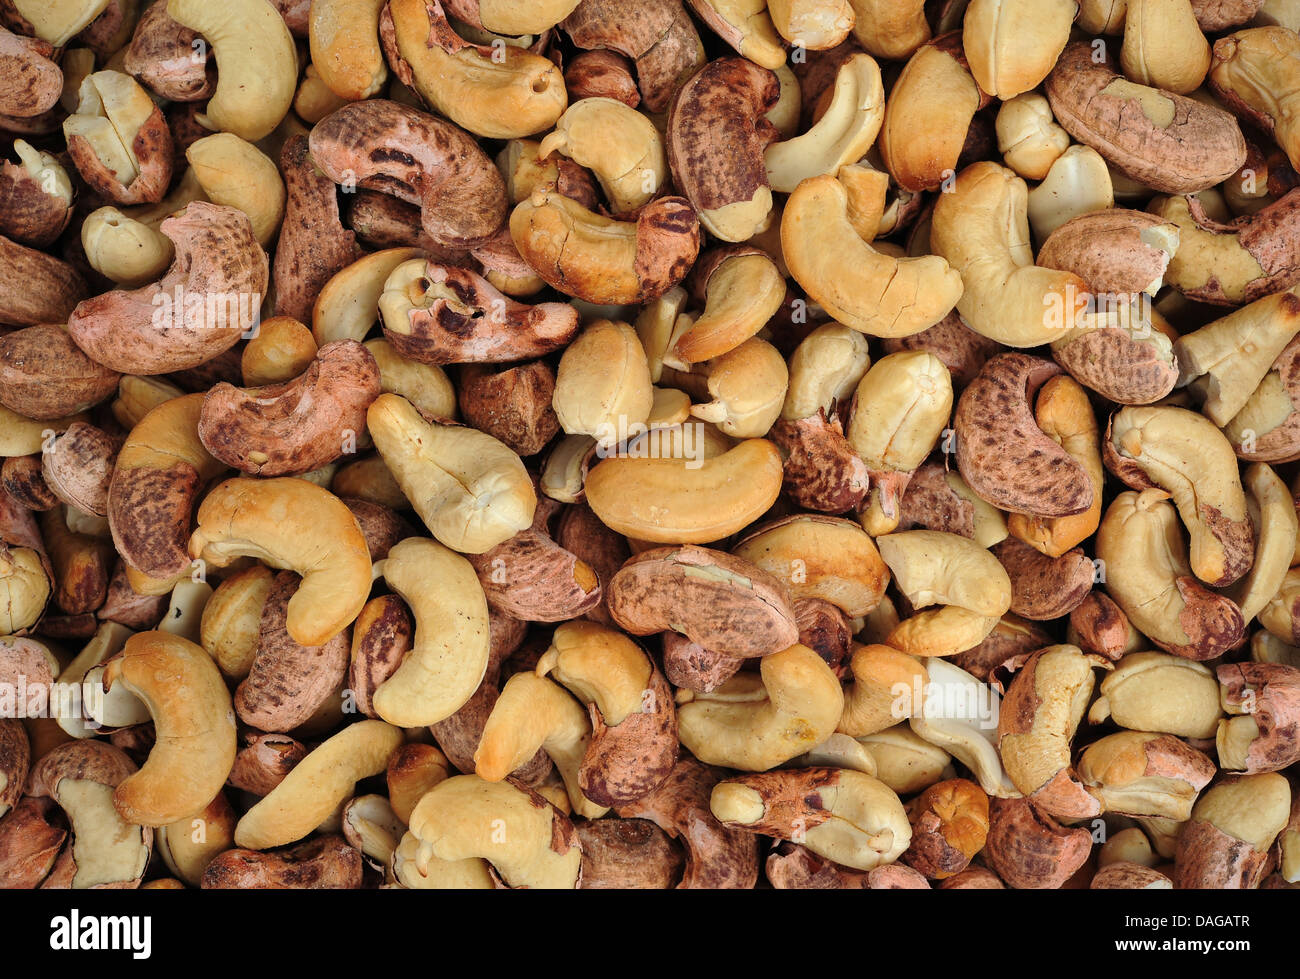 Cashew Nut Shell High Resolution Stock Photography and Images - Alamy